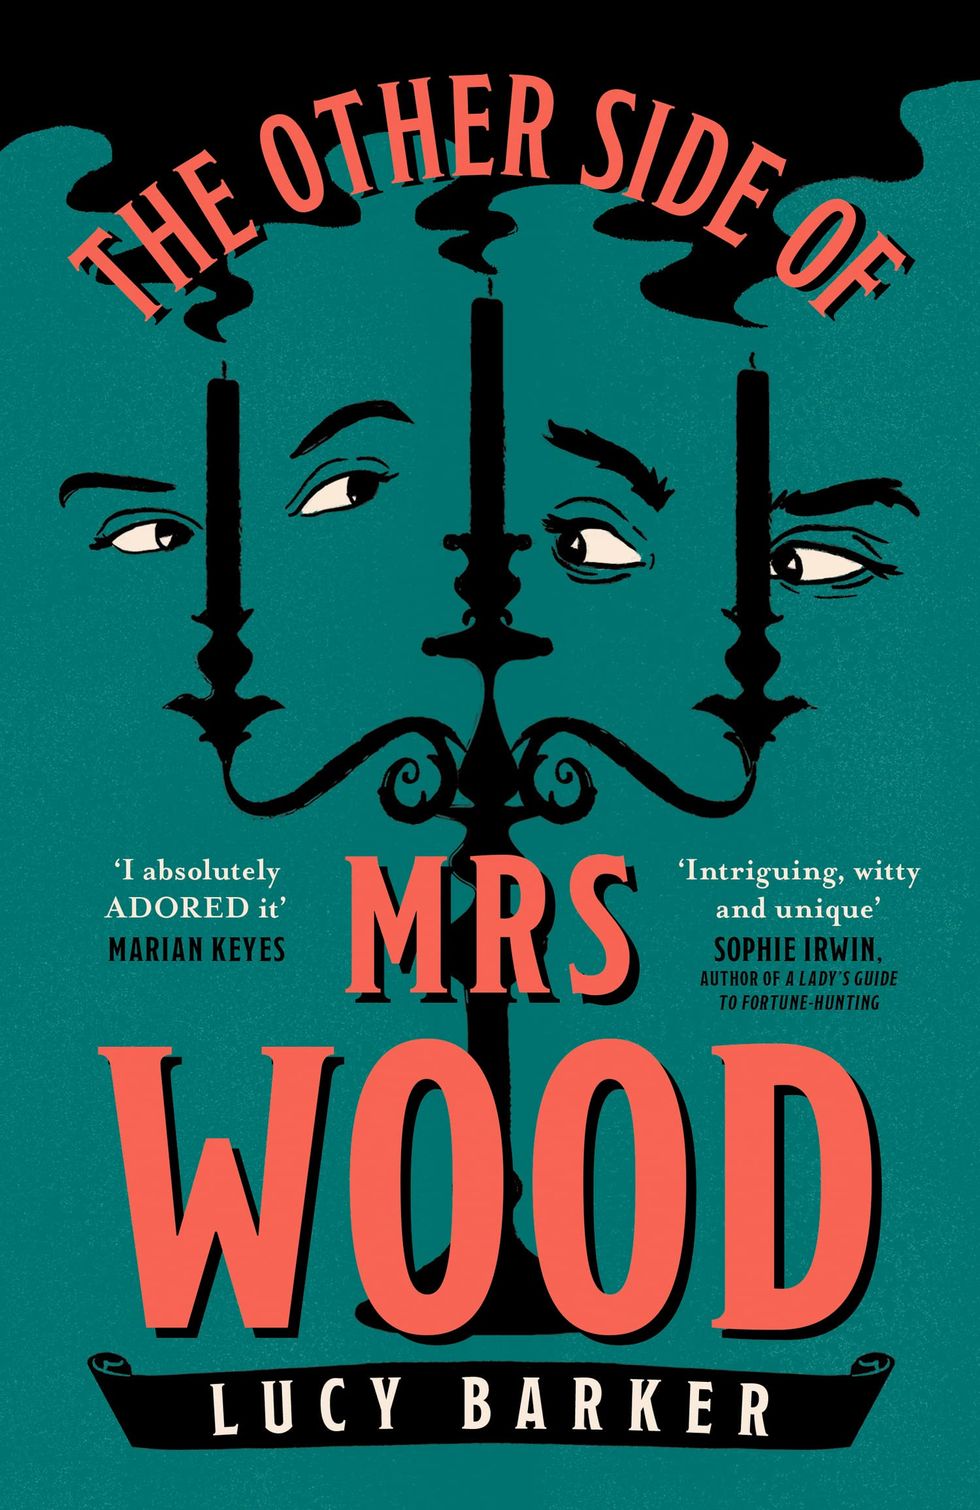 The Other Side Of Mrs Wood by Lucy Barker